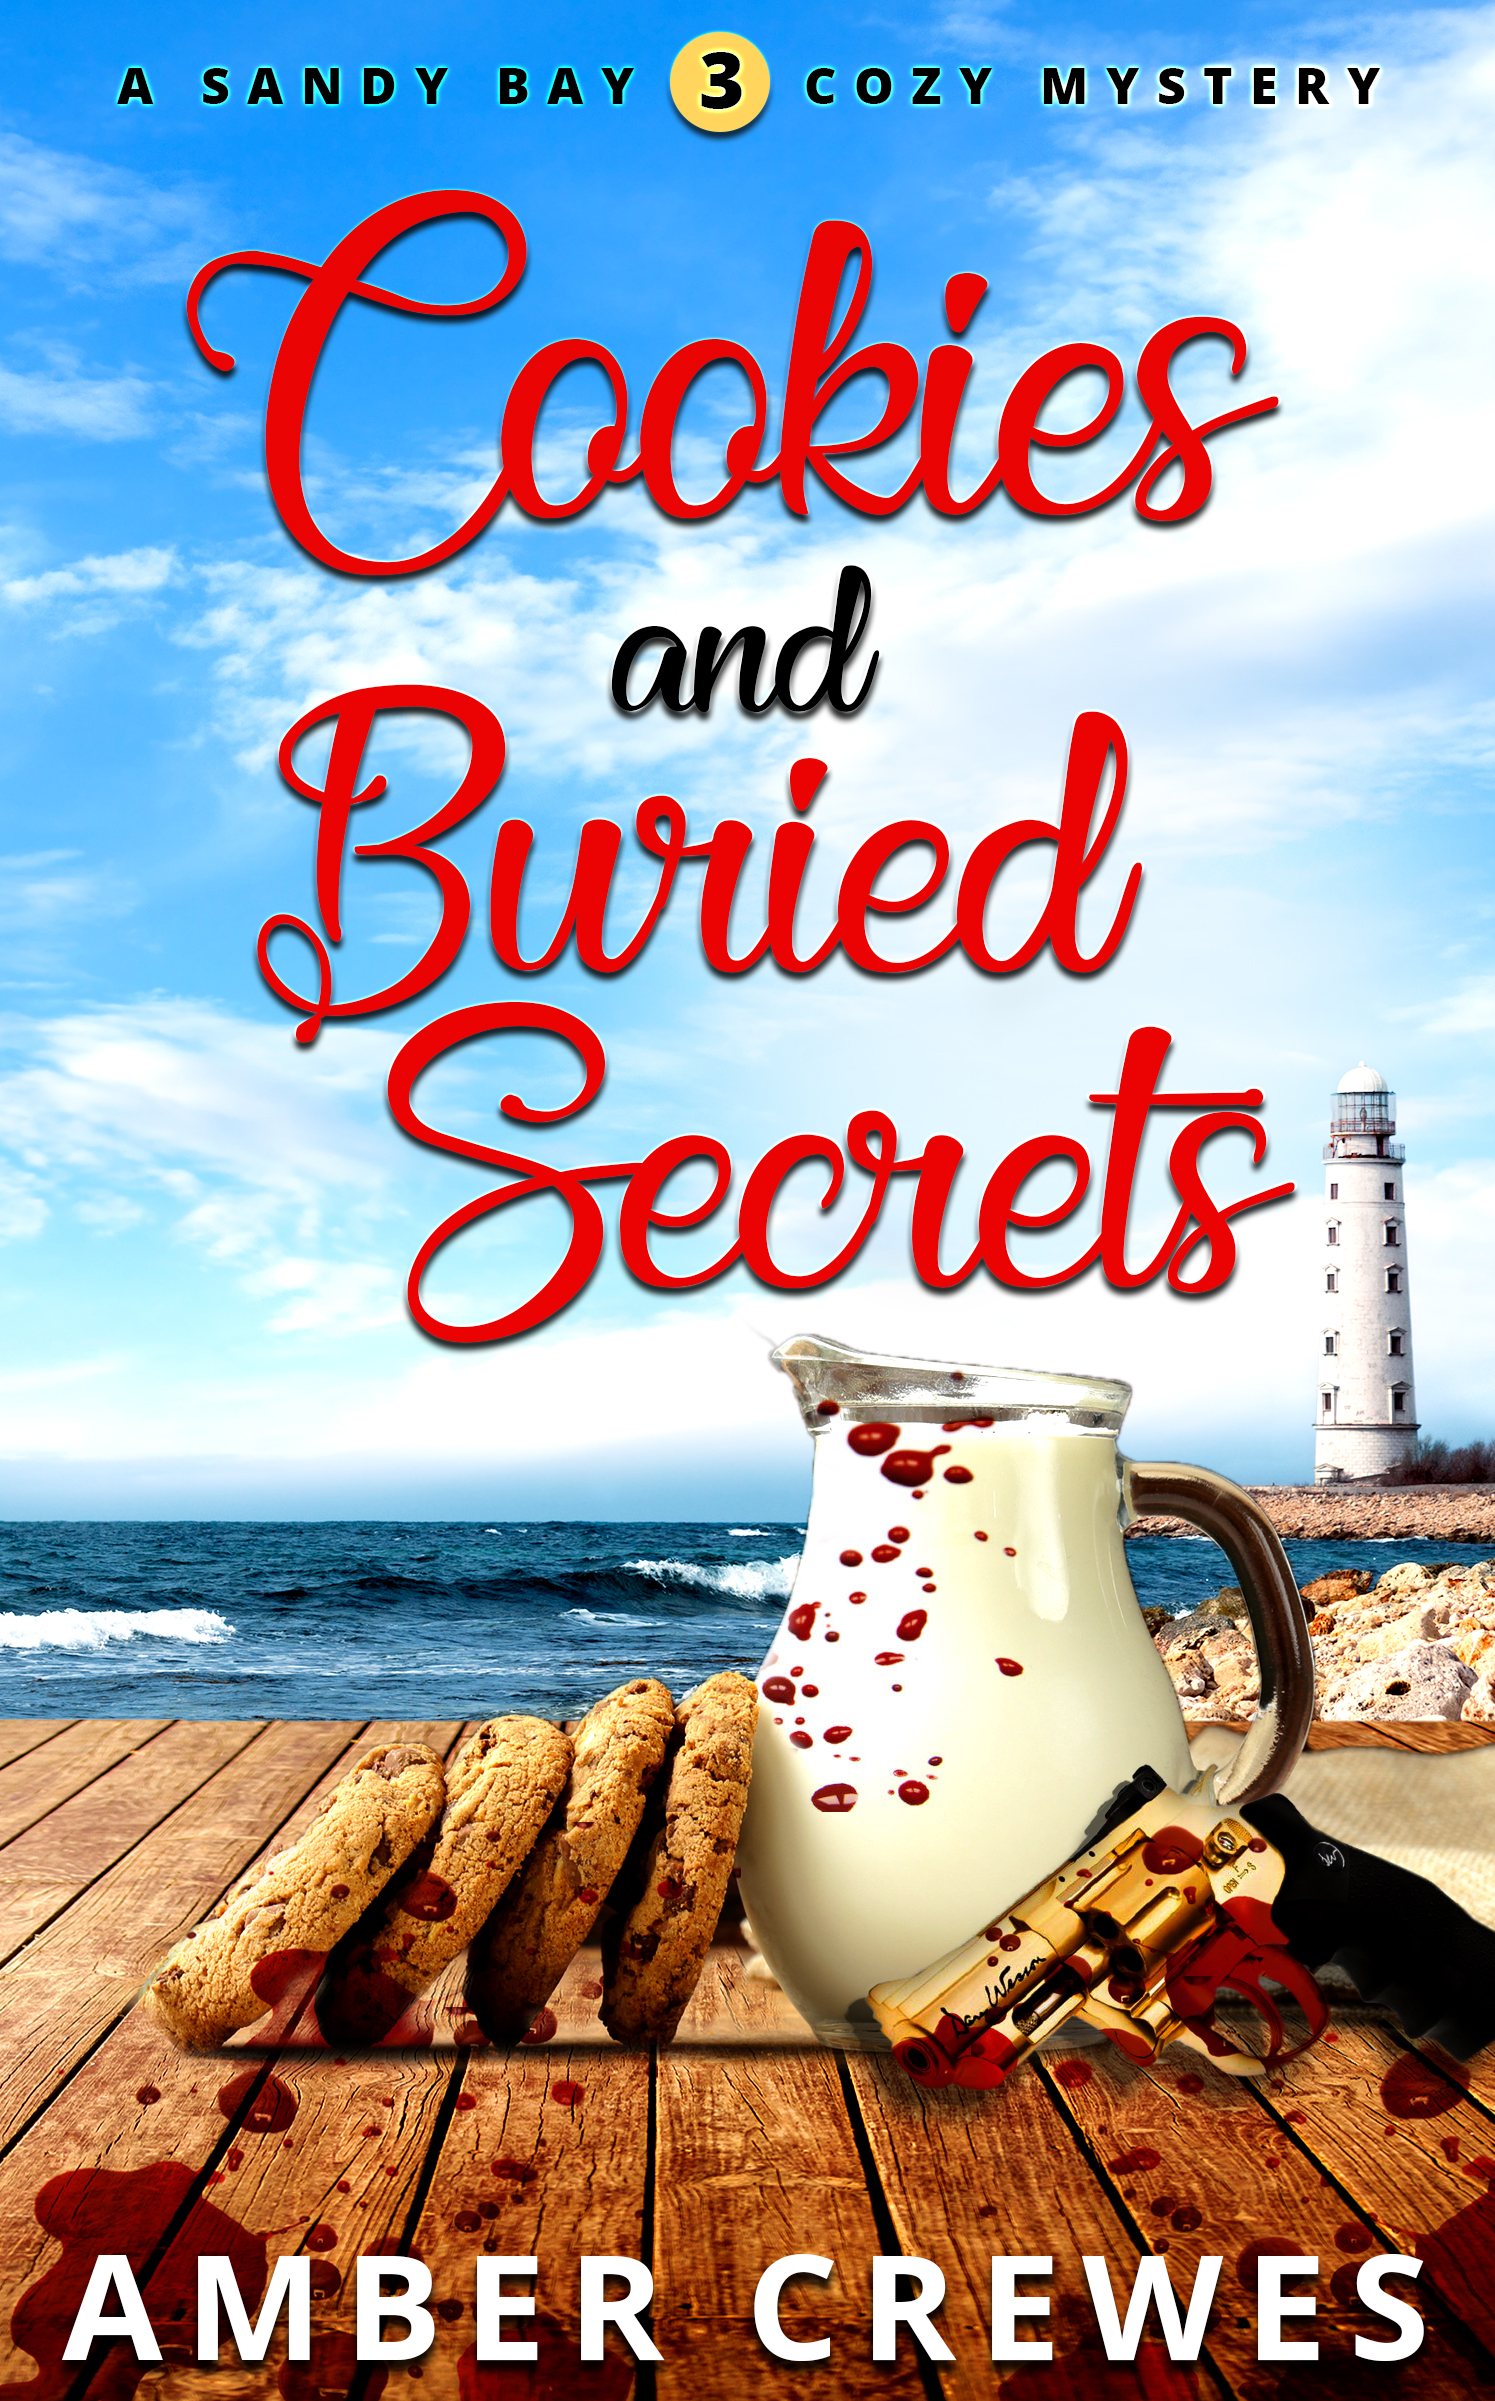 Cookies and Buried Secrets